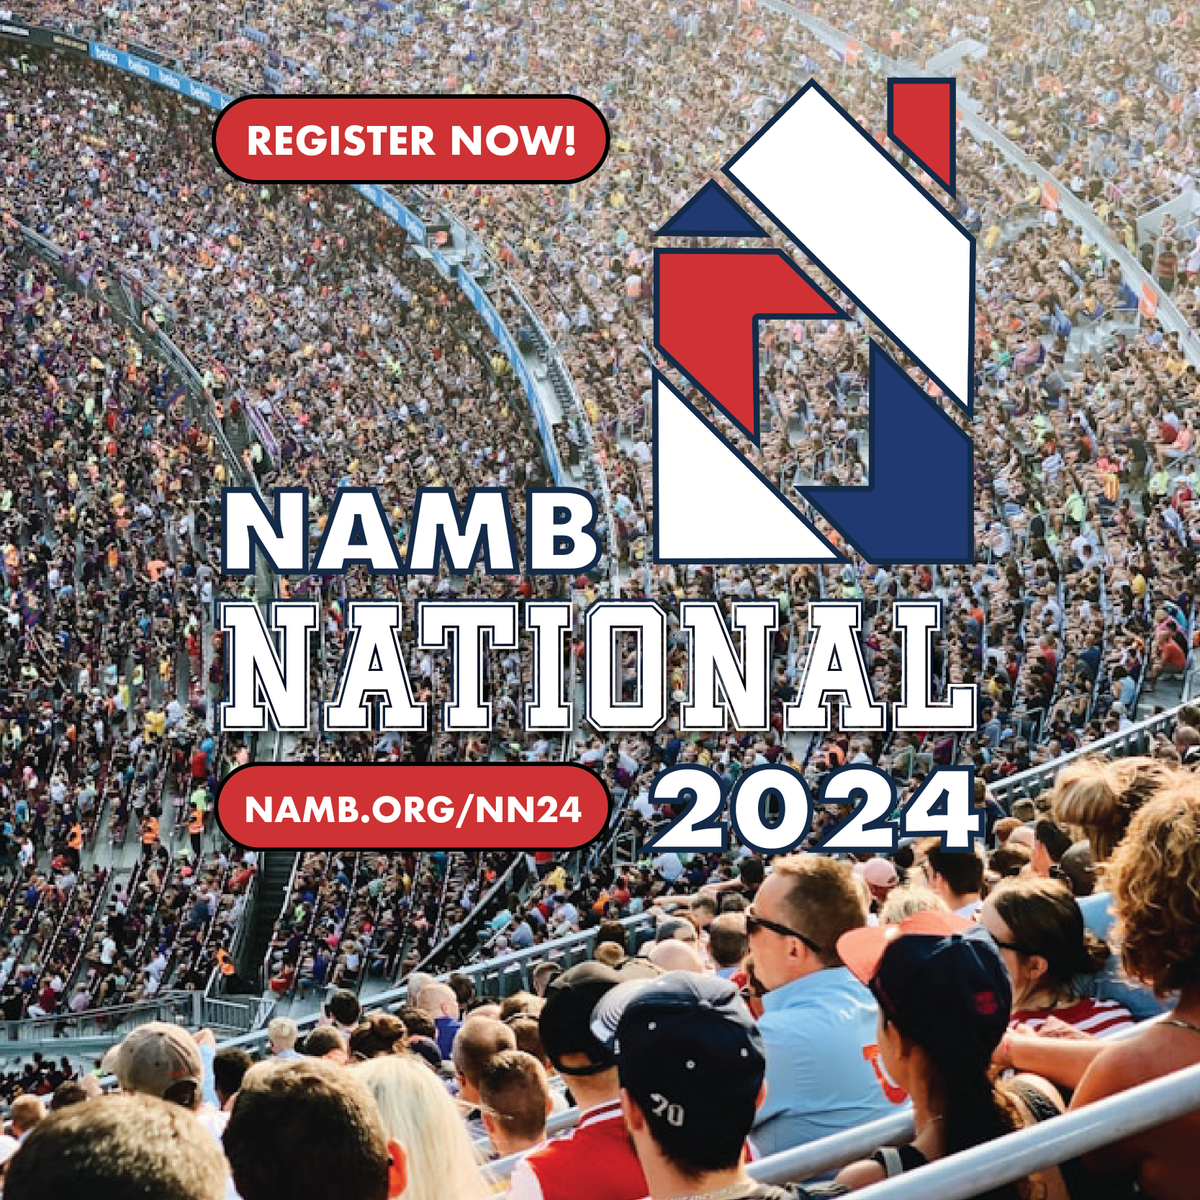 GO FOR THE WIN with us in Vegas this October!
Registration for NAMB National 2024 is now open: namb.org/nn24 

Free registration with early bird discount code WIN24!